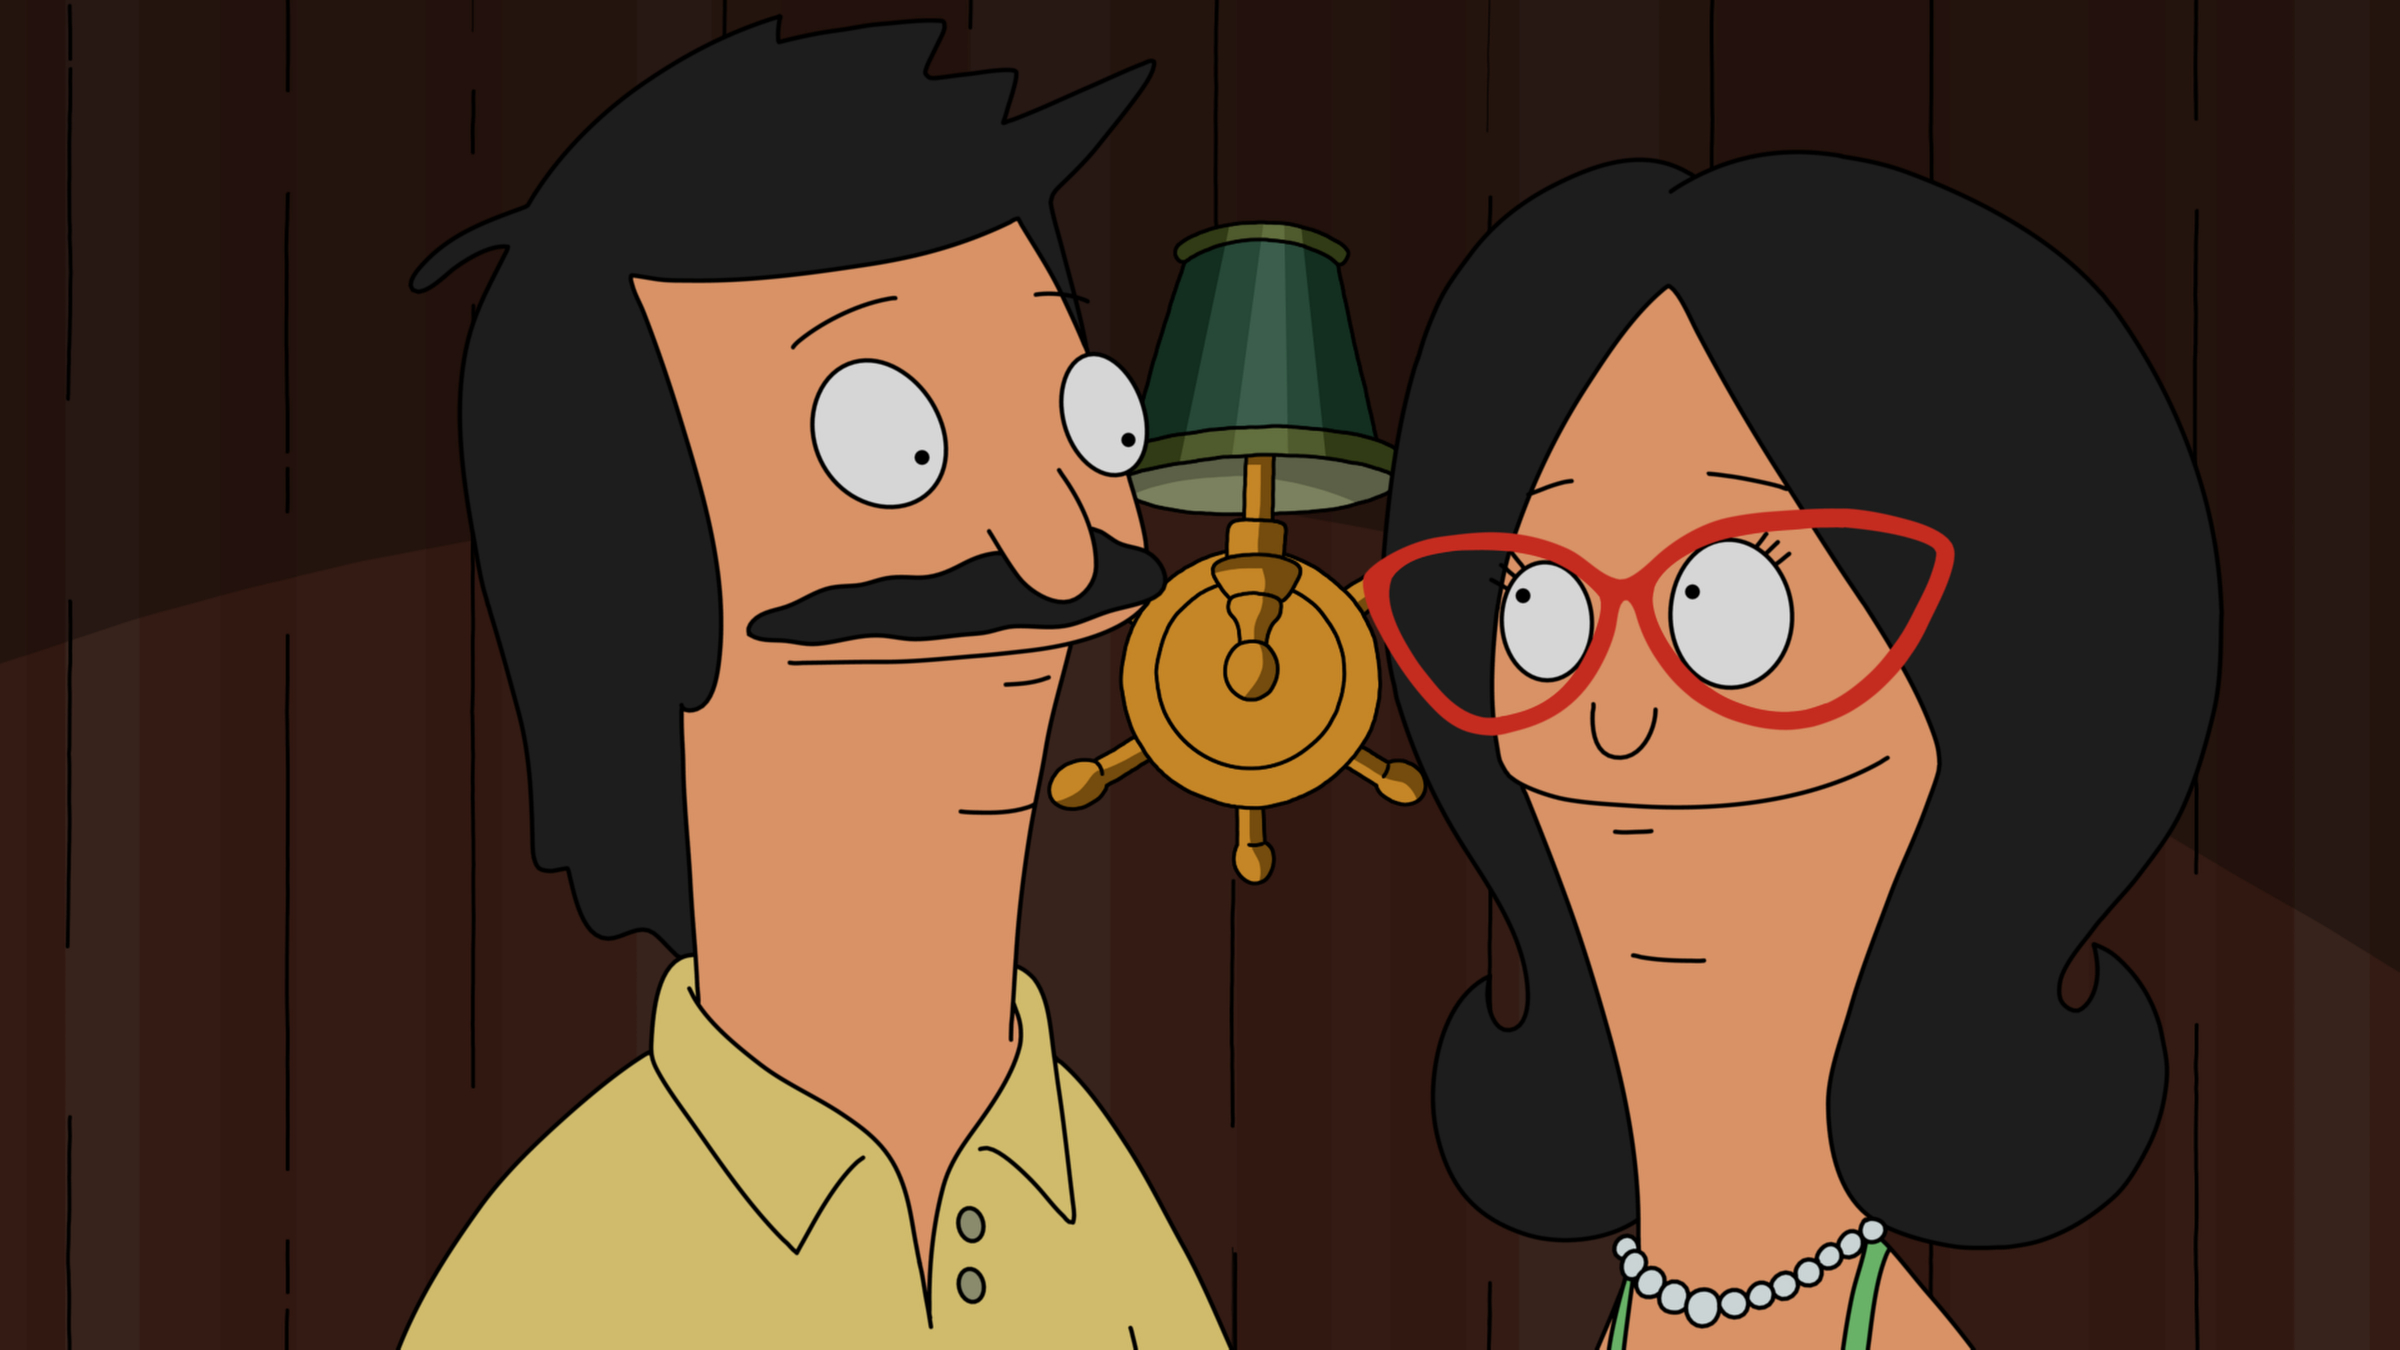 bobs burgers - Is Louise Belcher ever depicted without her hat? - Movies &  TV Stack Exchange